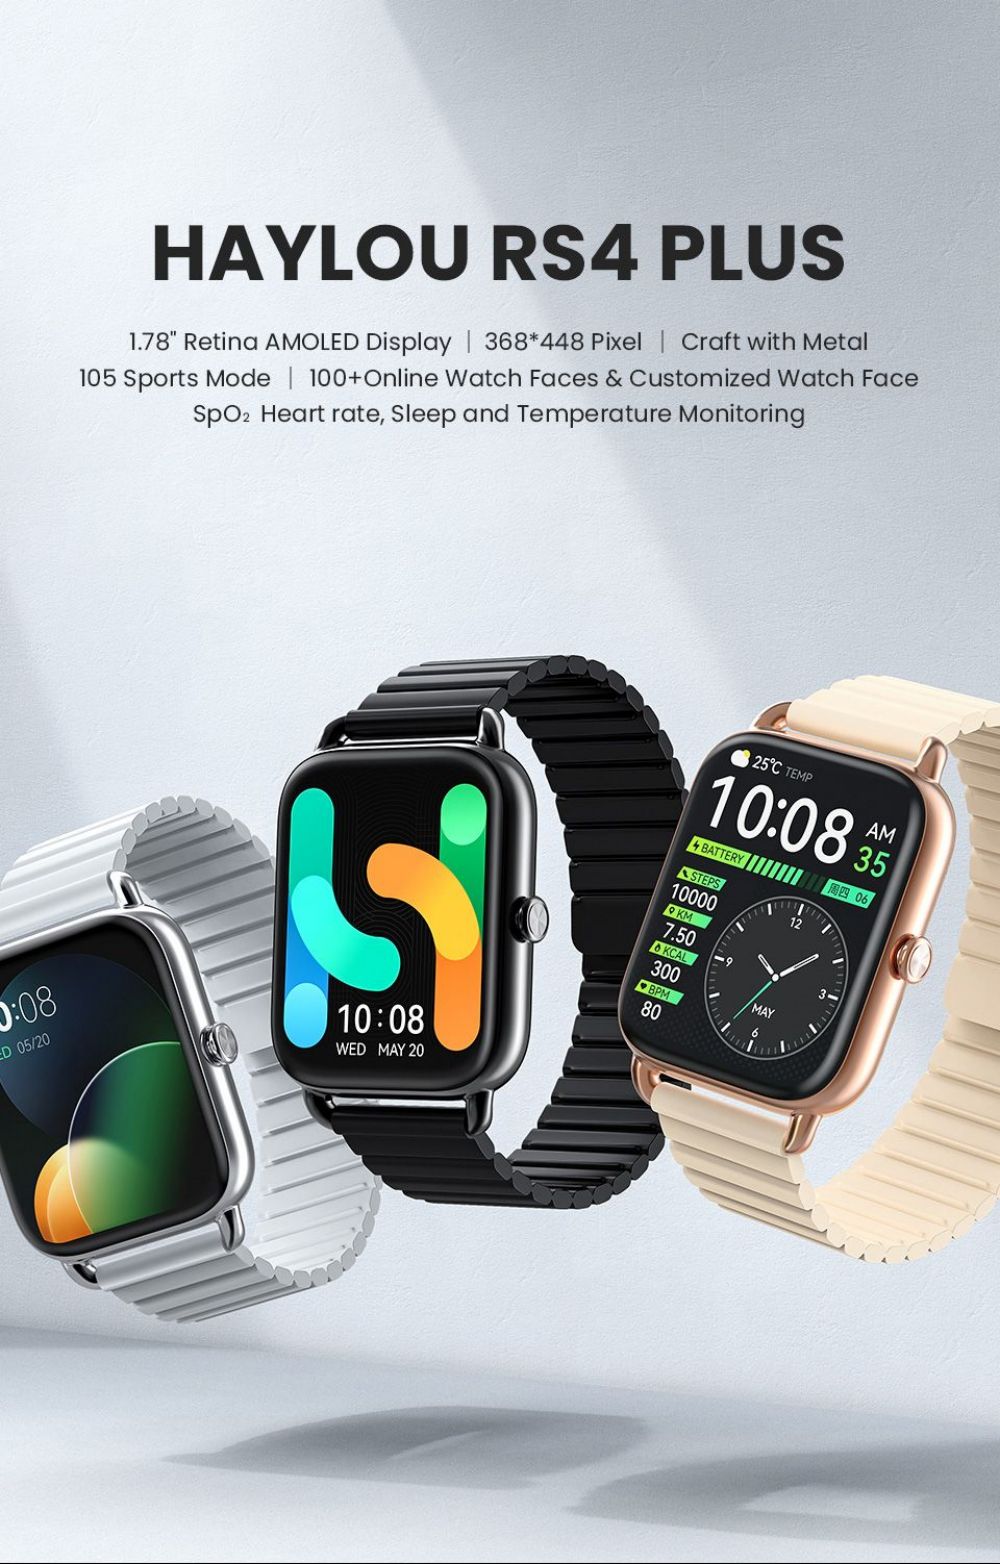 Haylou RS4 Plus Smartwatch 1.78-Inch Retina AMOLED HD Display 105 Sports Mode SpO2 Heart Rate - Black Sliver